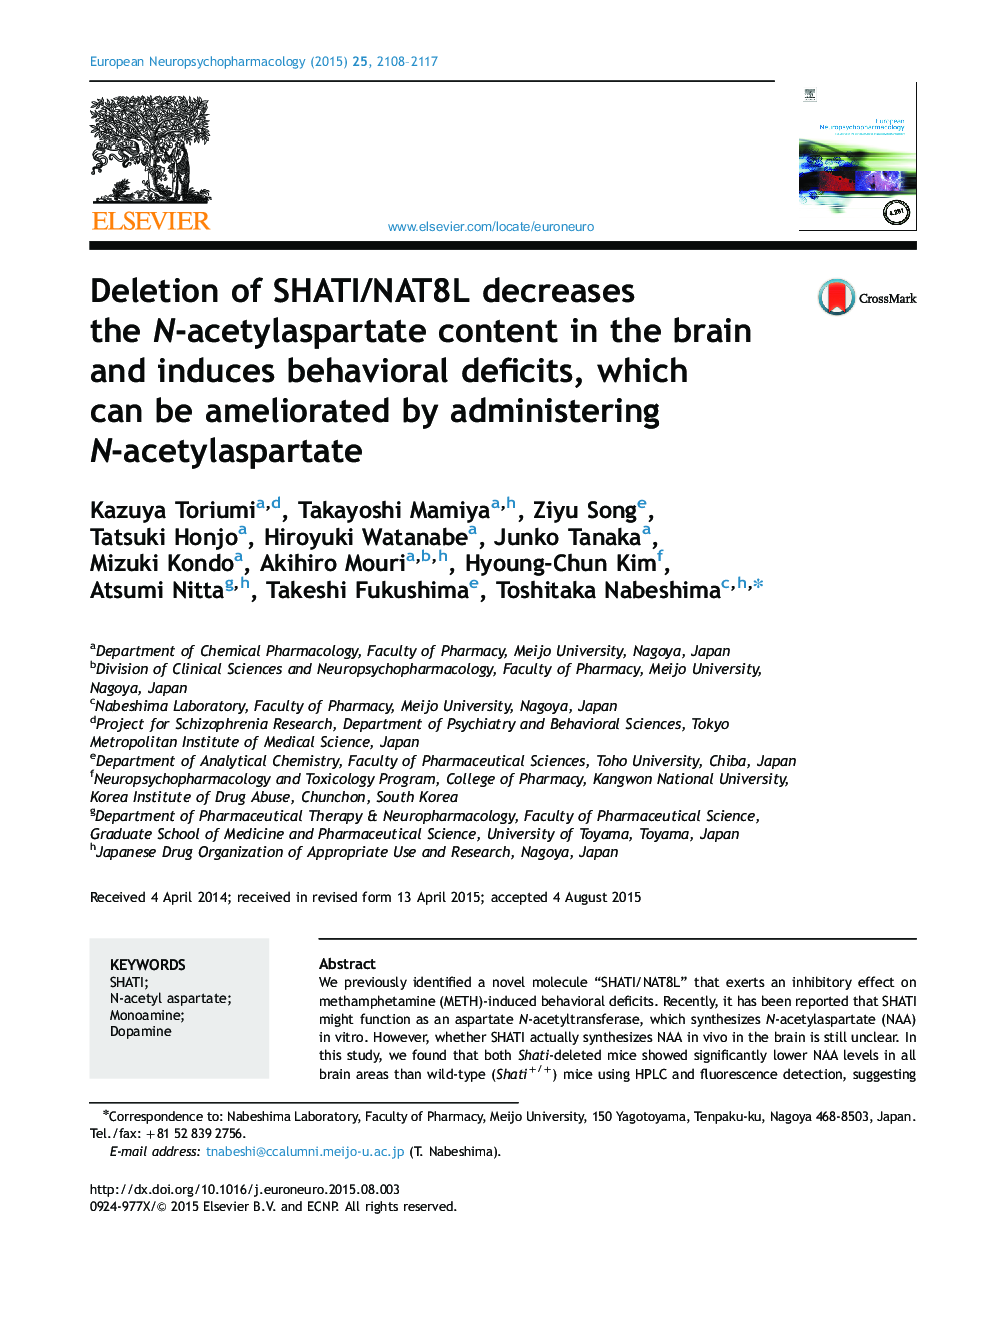 Deletion of SHATI/NAT8L decreases the N-acetylaspartate content in the brain and induces behavioral deficits, which can be ameliorated by administering N-acetylaspartate